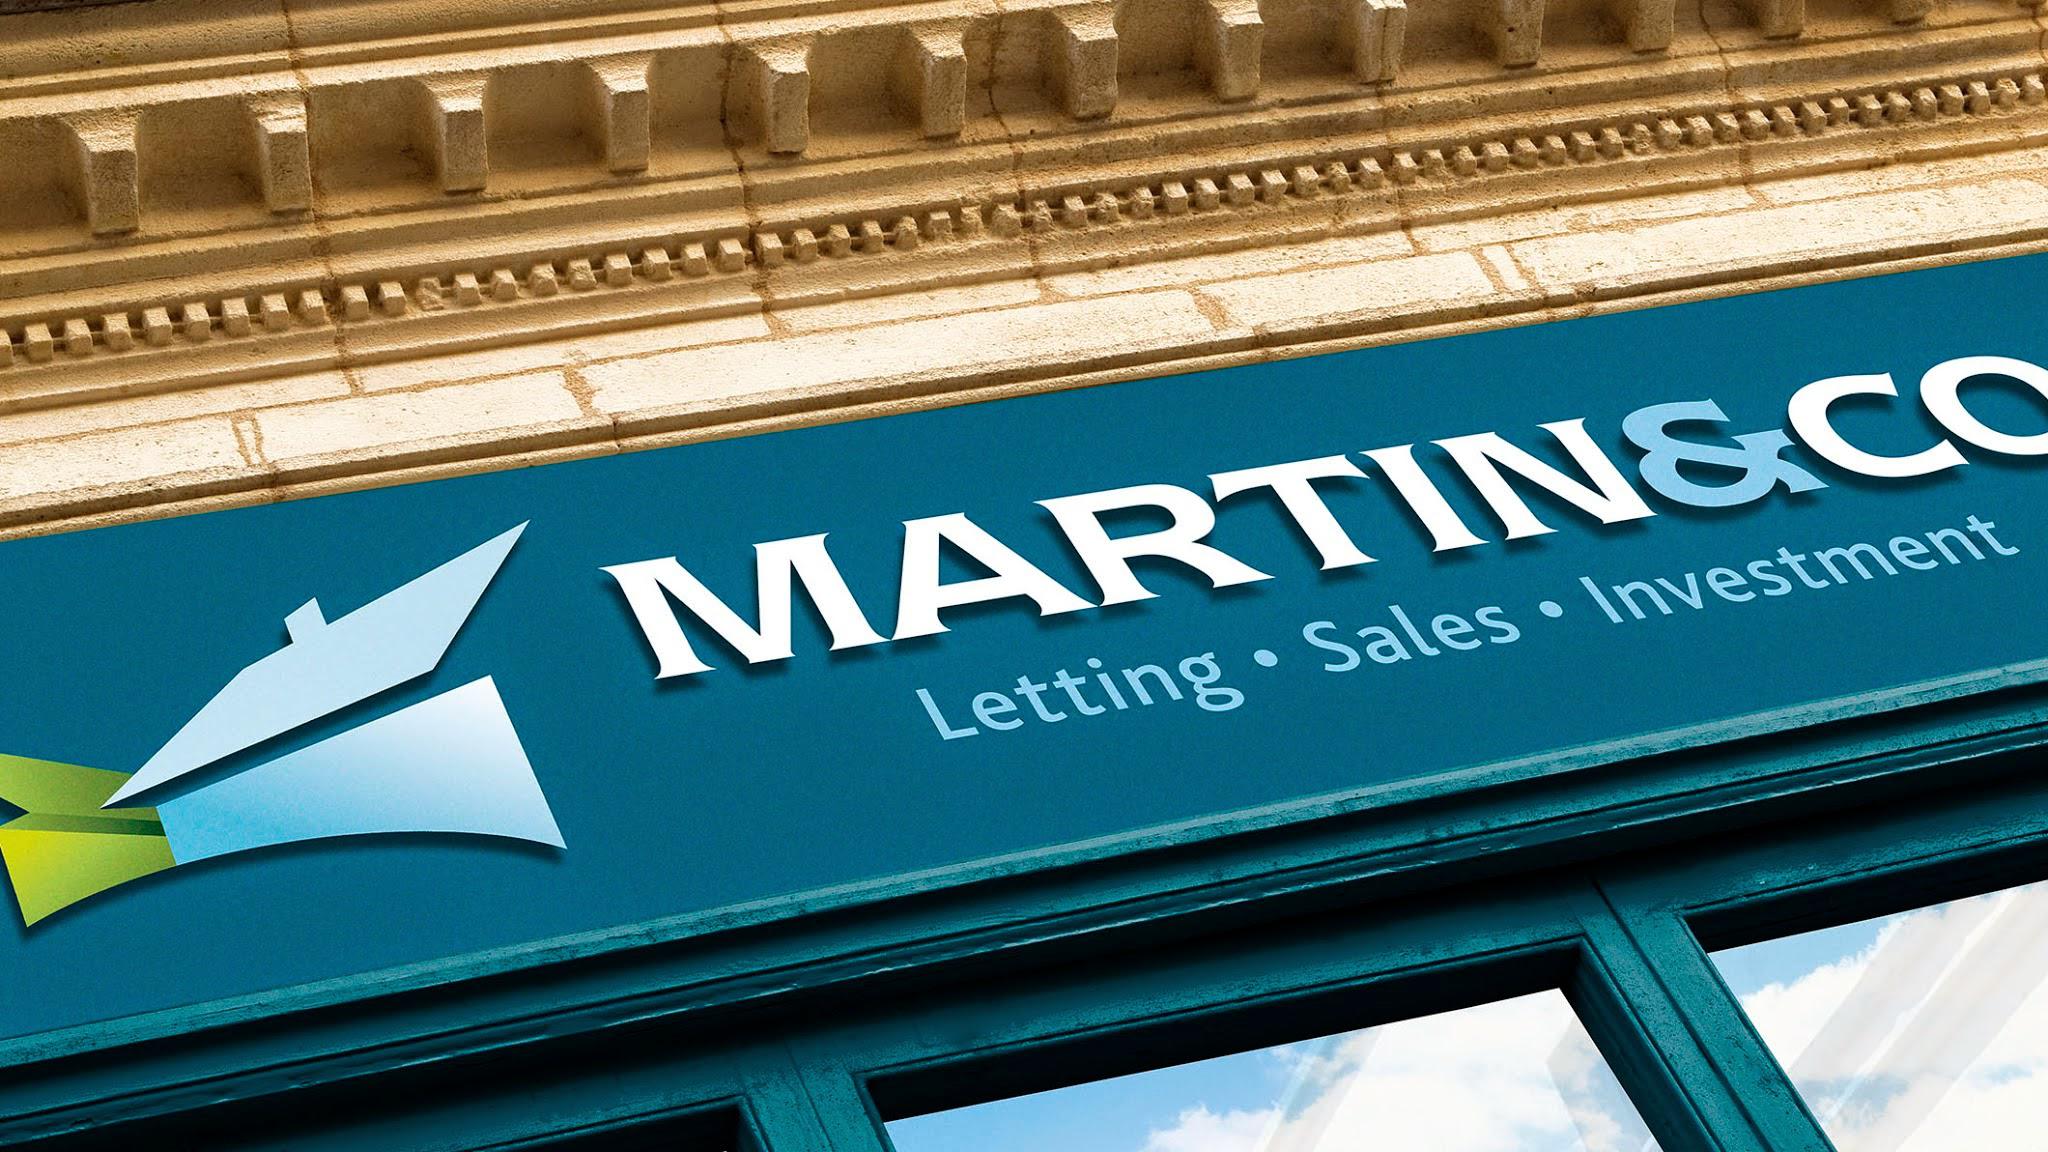 Martin & Co Exeter Lettings & Estate Agents Exeter 01392 254488